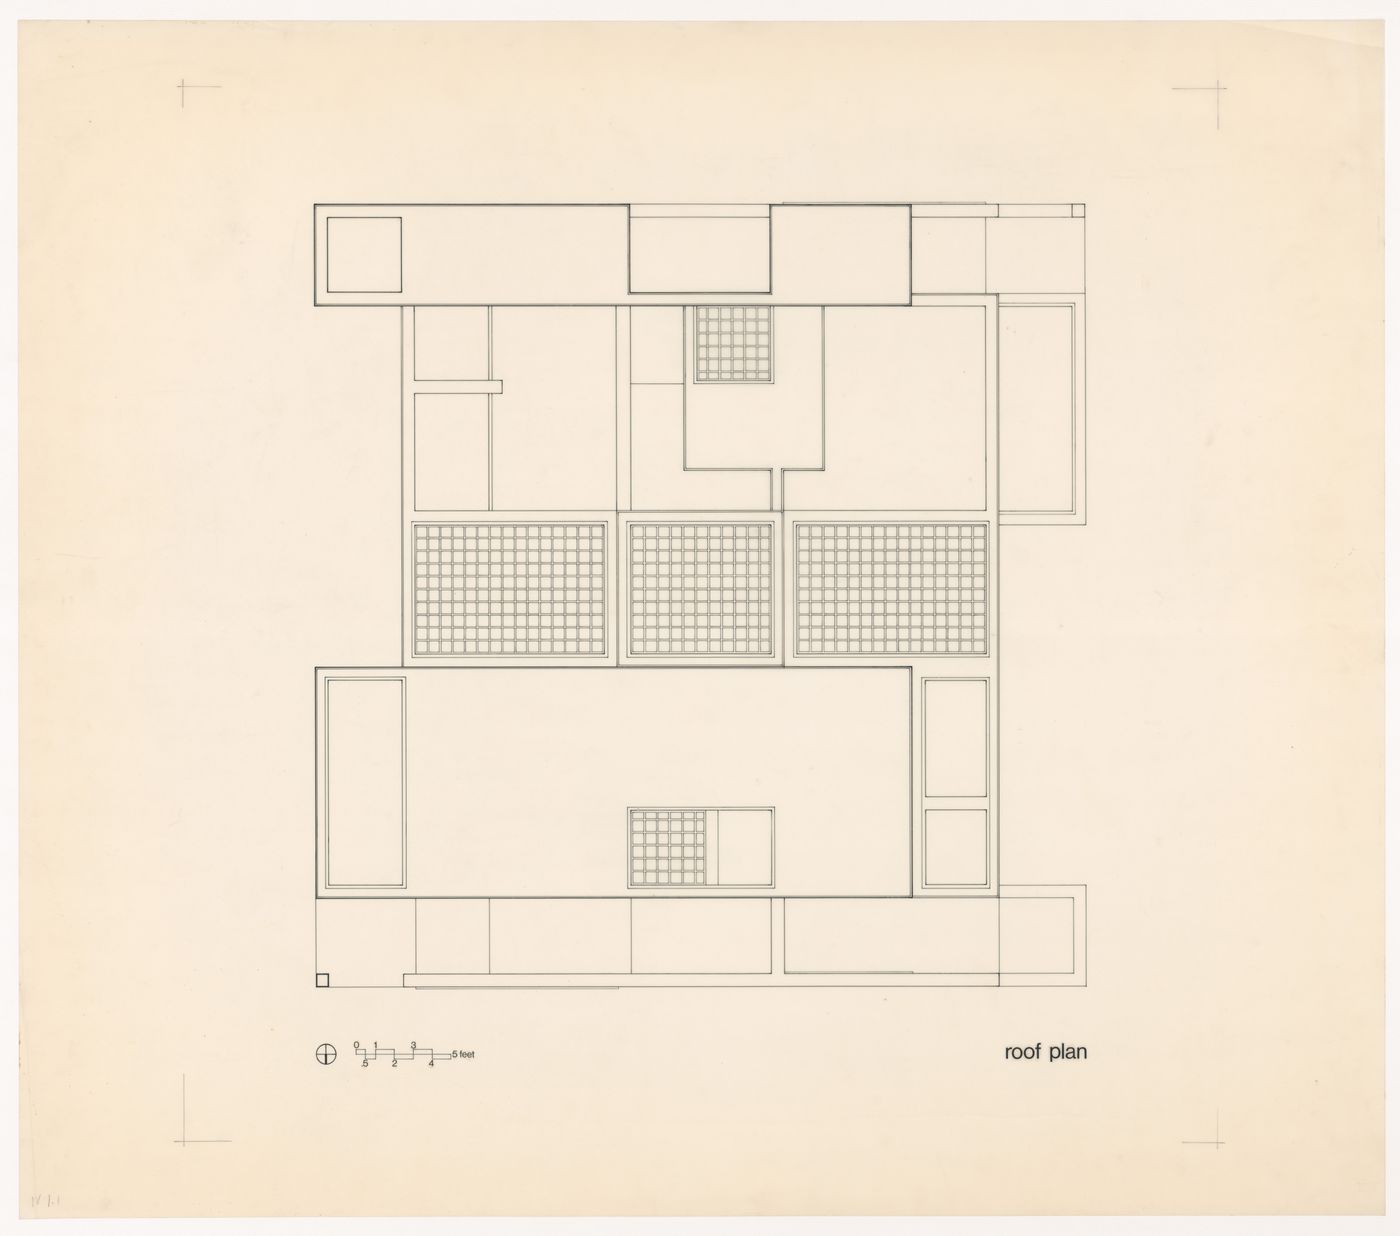 Roof plan for House IV, Falls Village, Connecticut